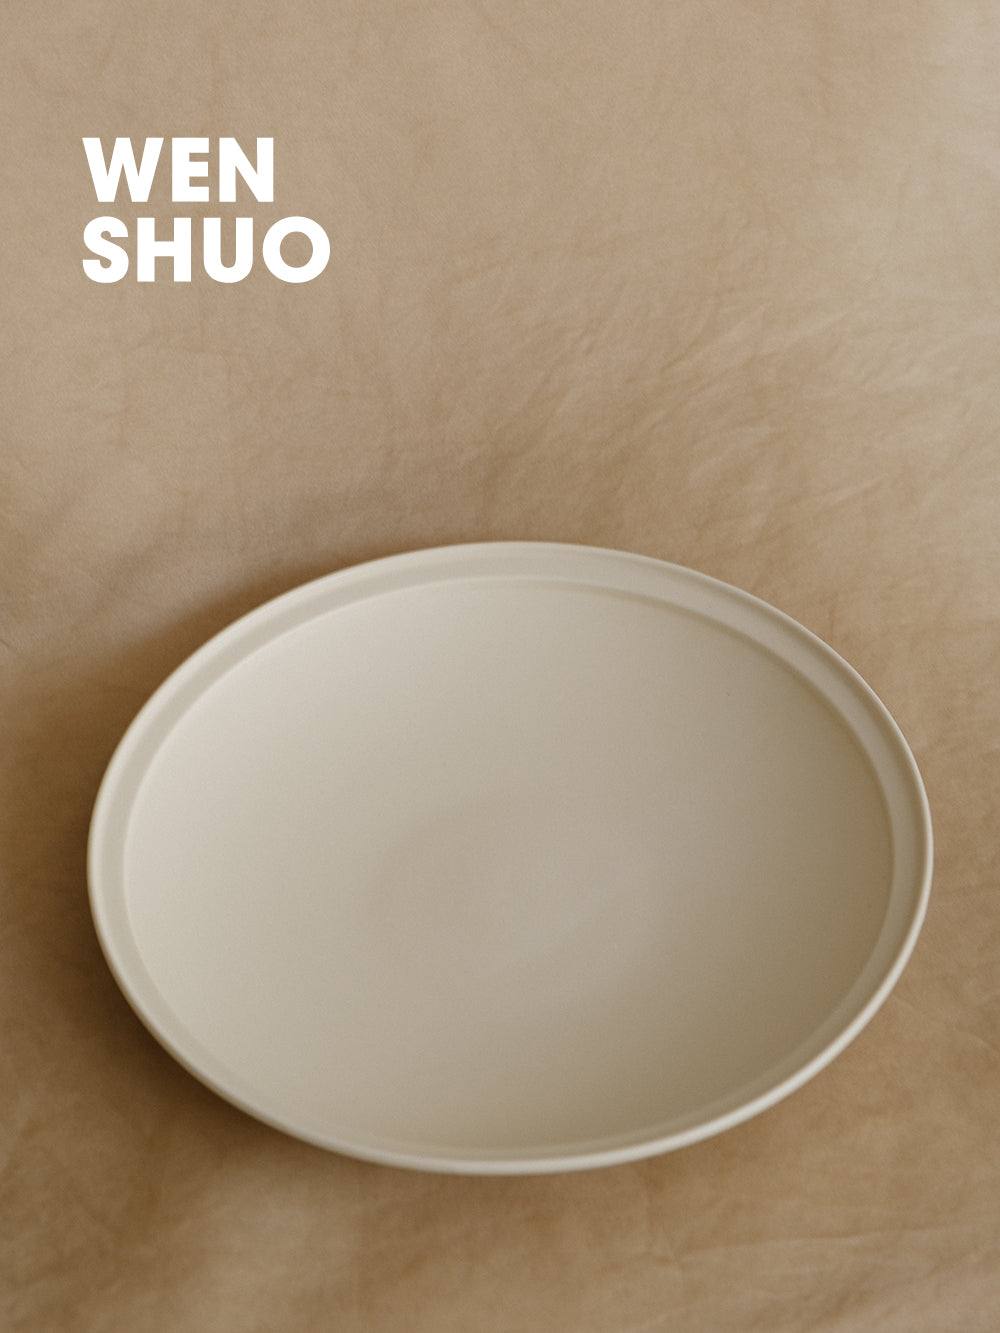 Linear Dinner Plate - WENSHUO